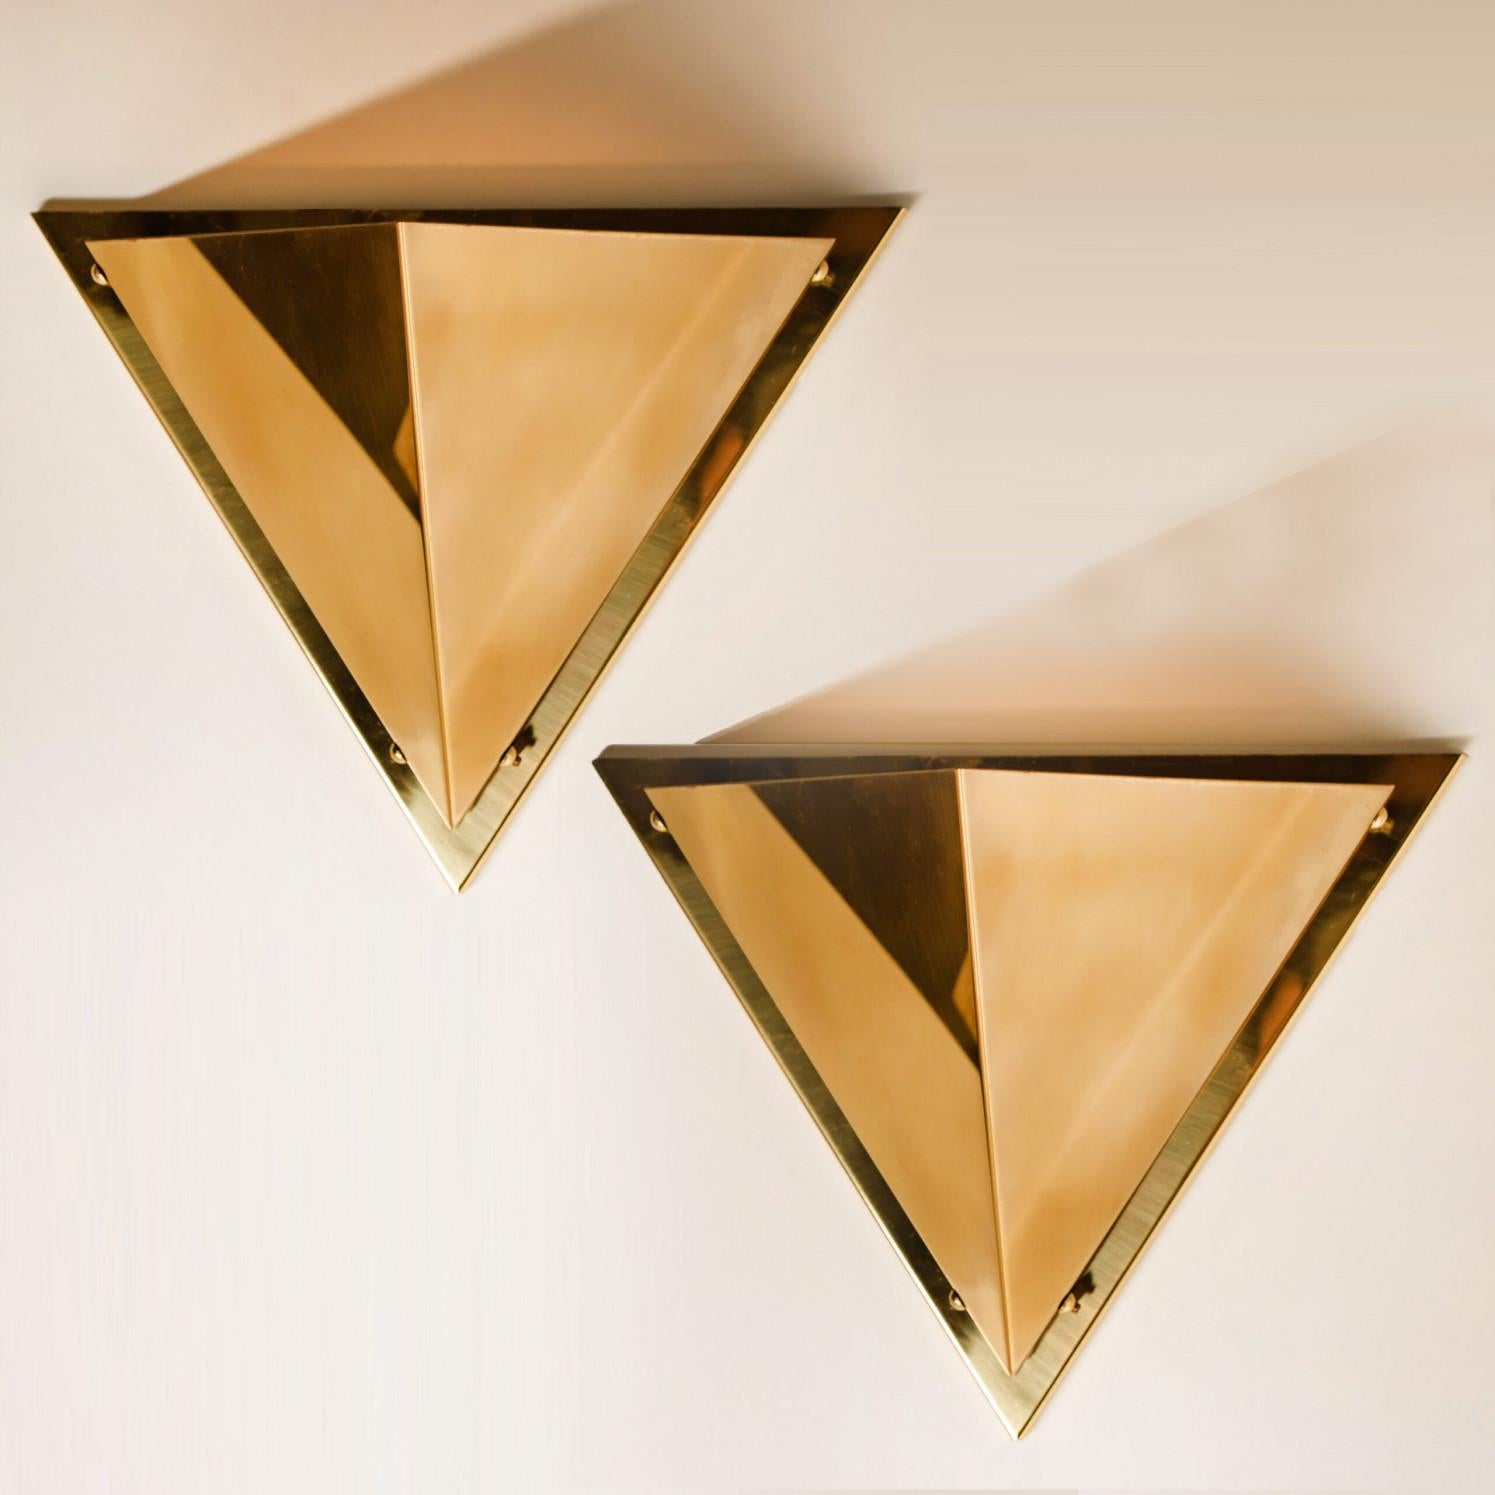 Mid-Century Modern 1 of the 5 Pyramid Shaped Massive Brass Wall Lamps, 1970s For Sale